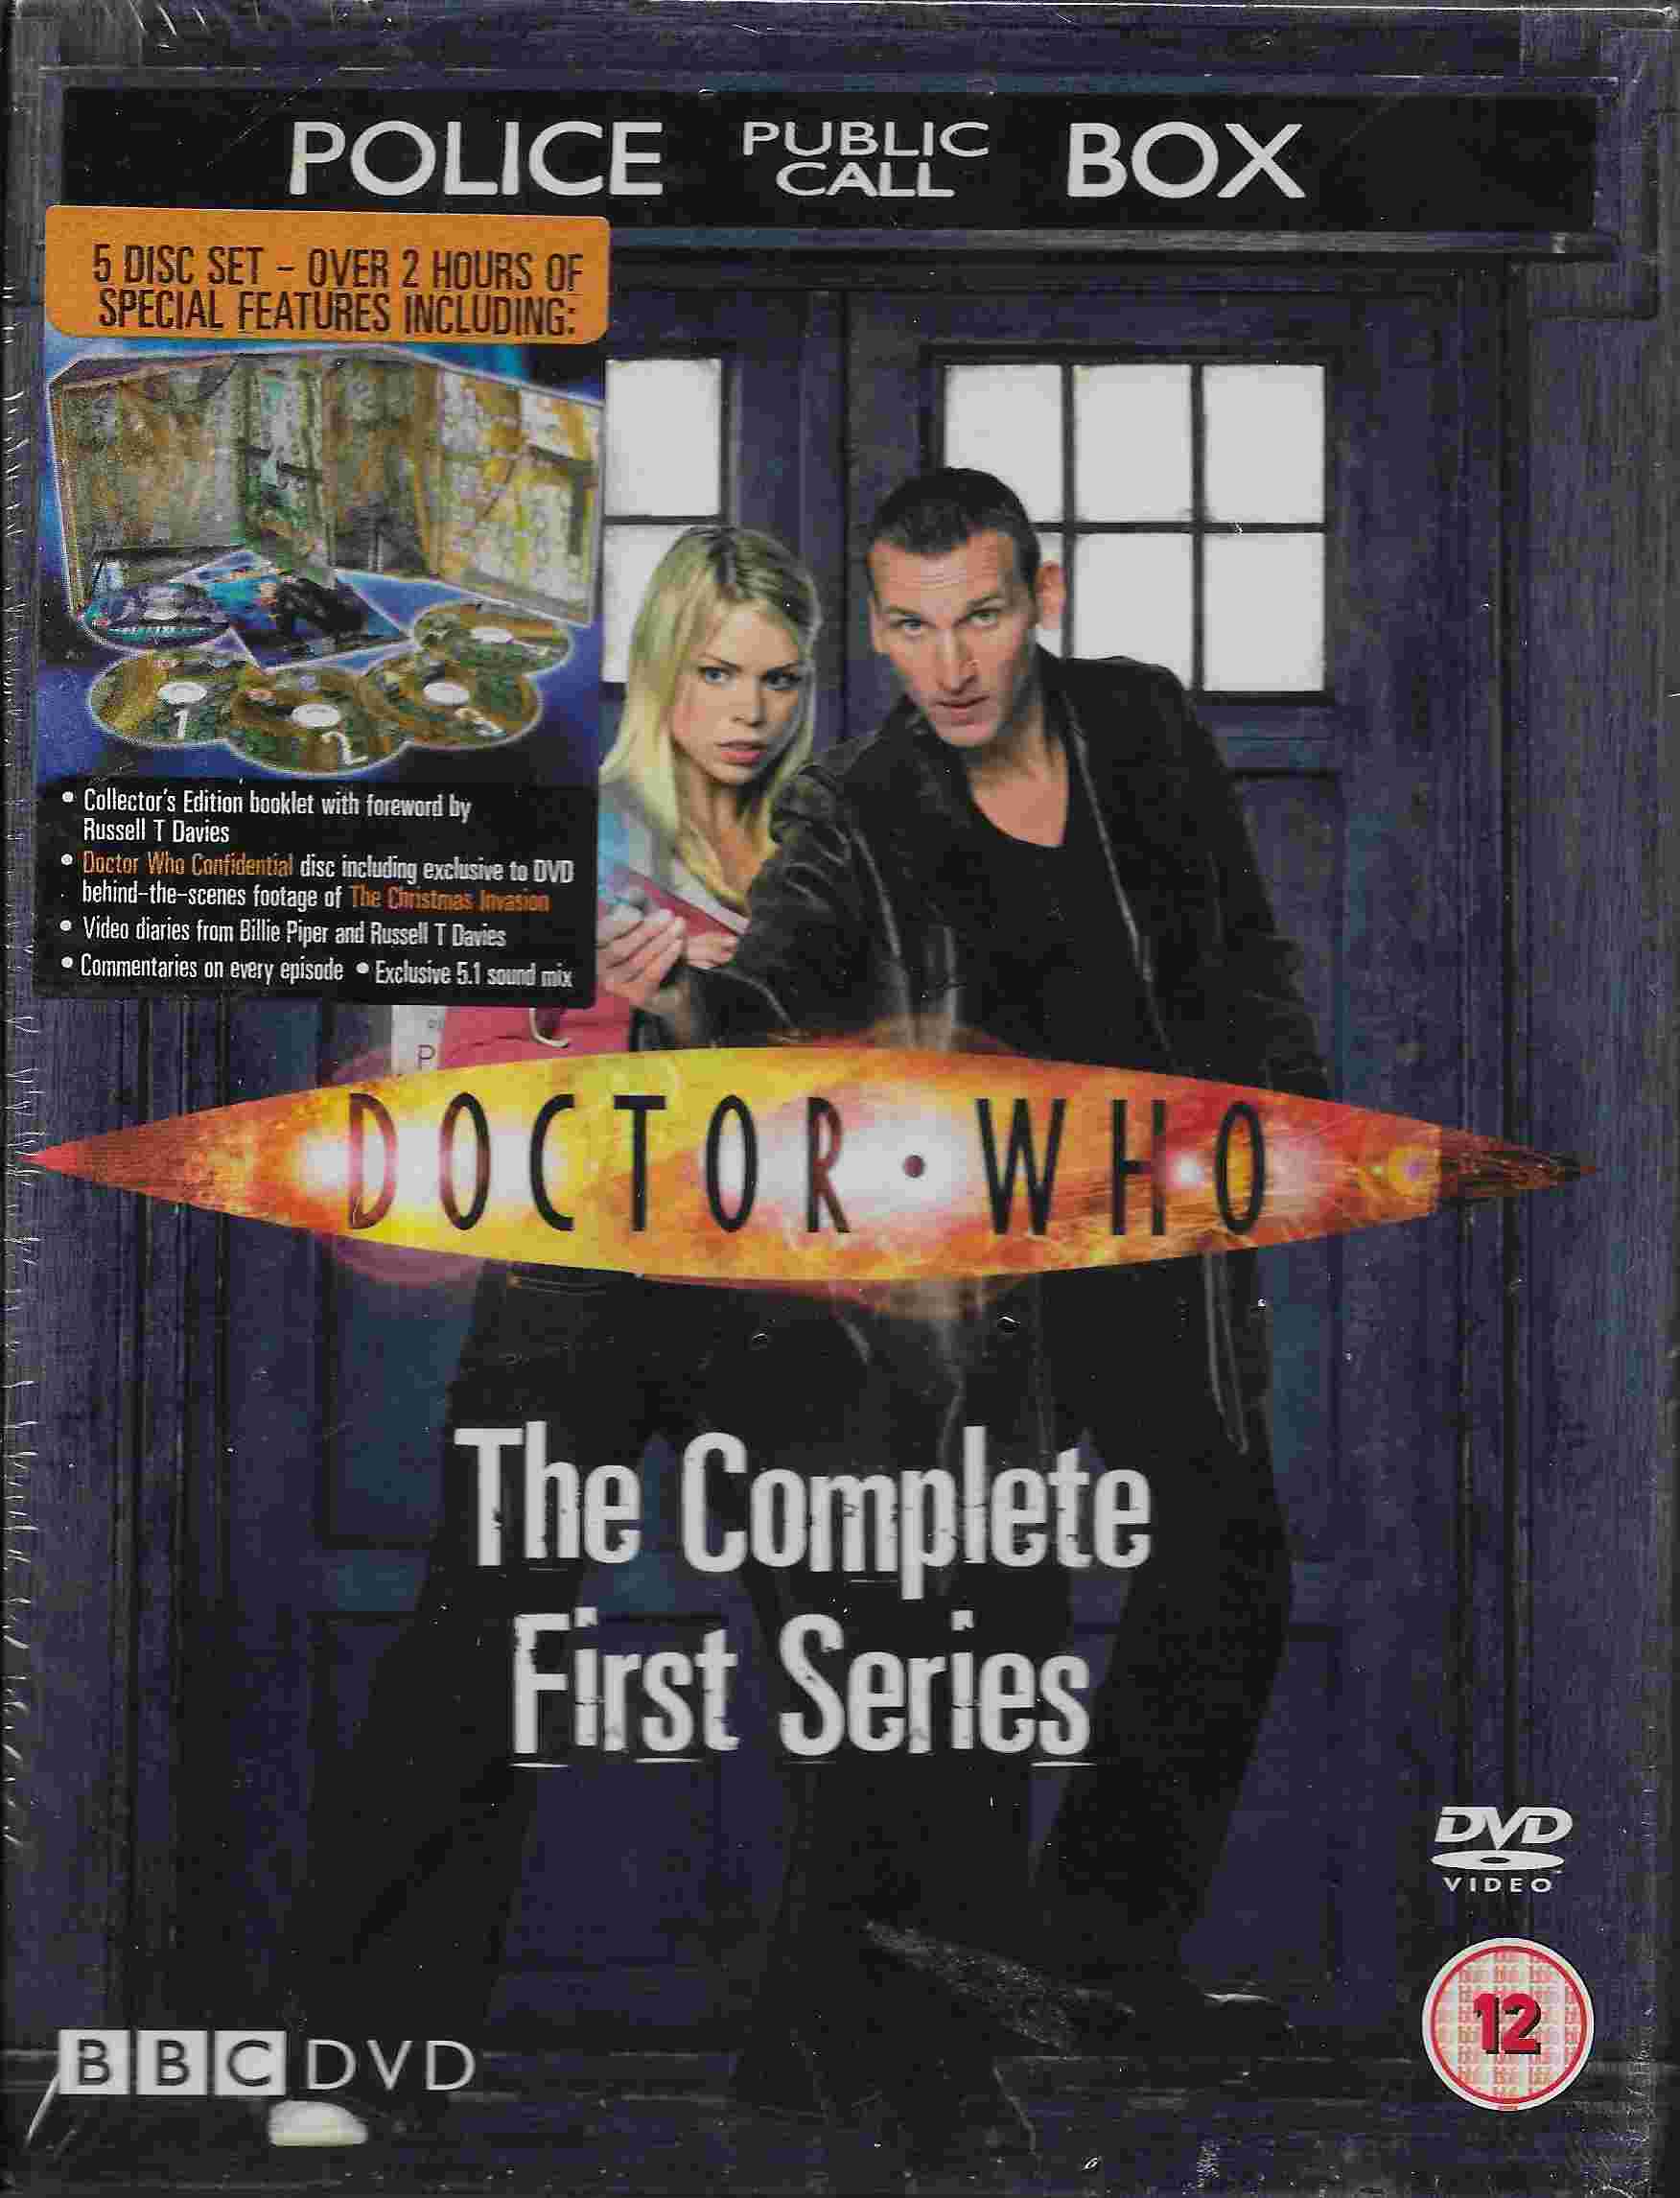 Picture of BBCDVD 1770S Doctor Who - Series 1 boxed set (Square edition) by artist Various from the BBC dvds - Records and Tapes library